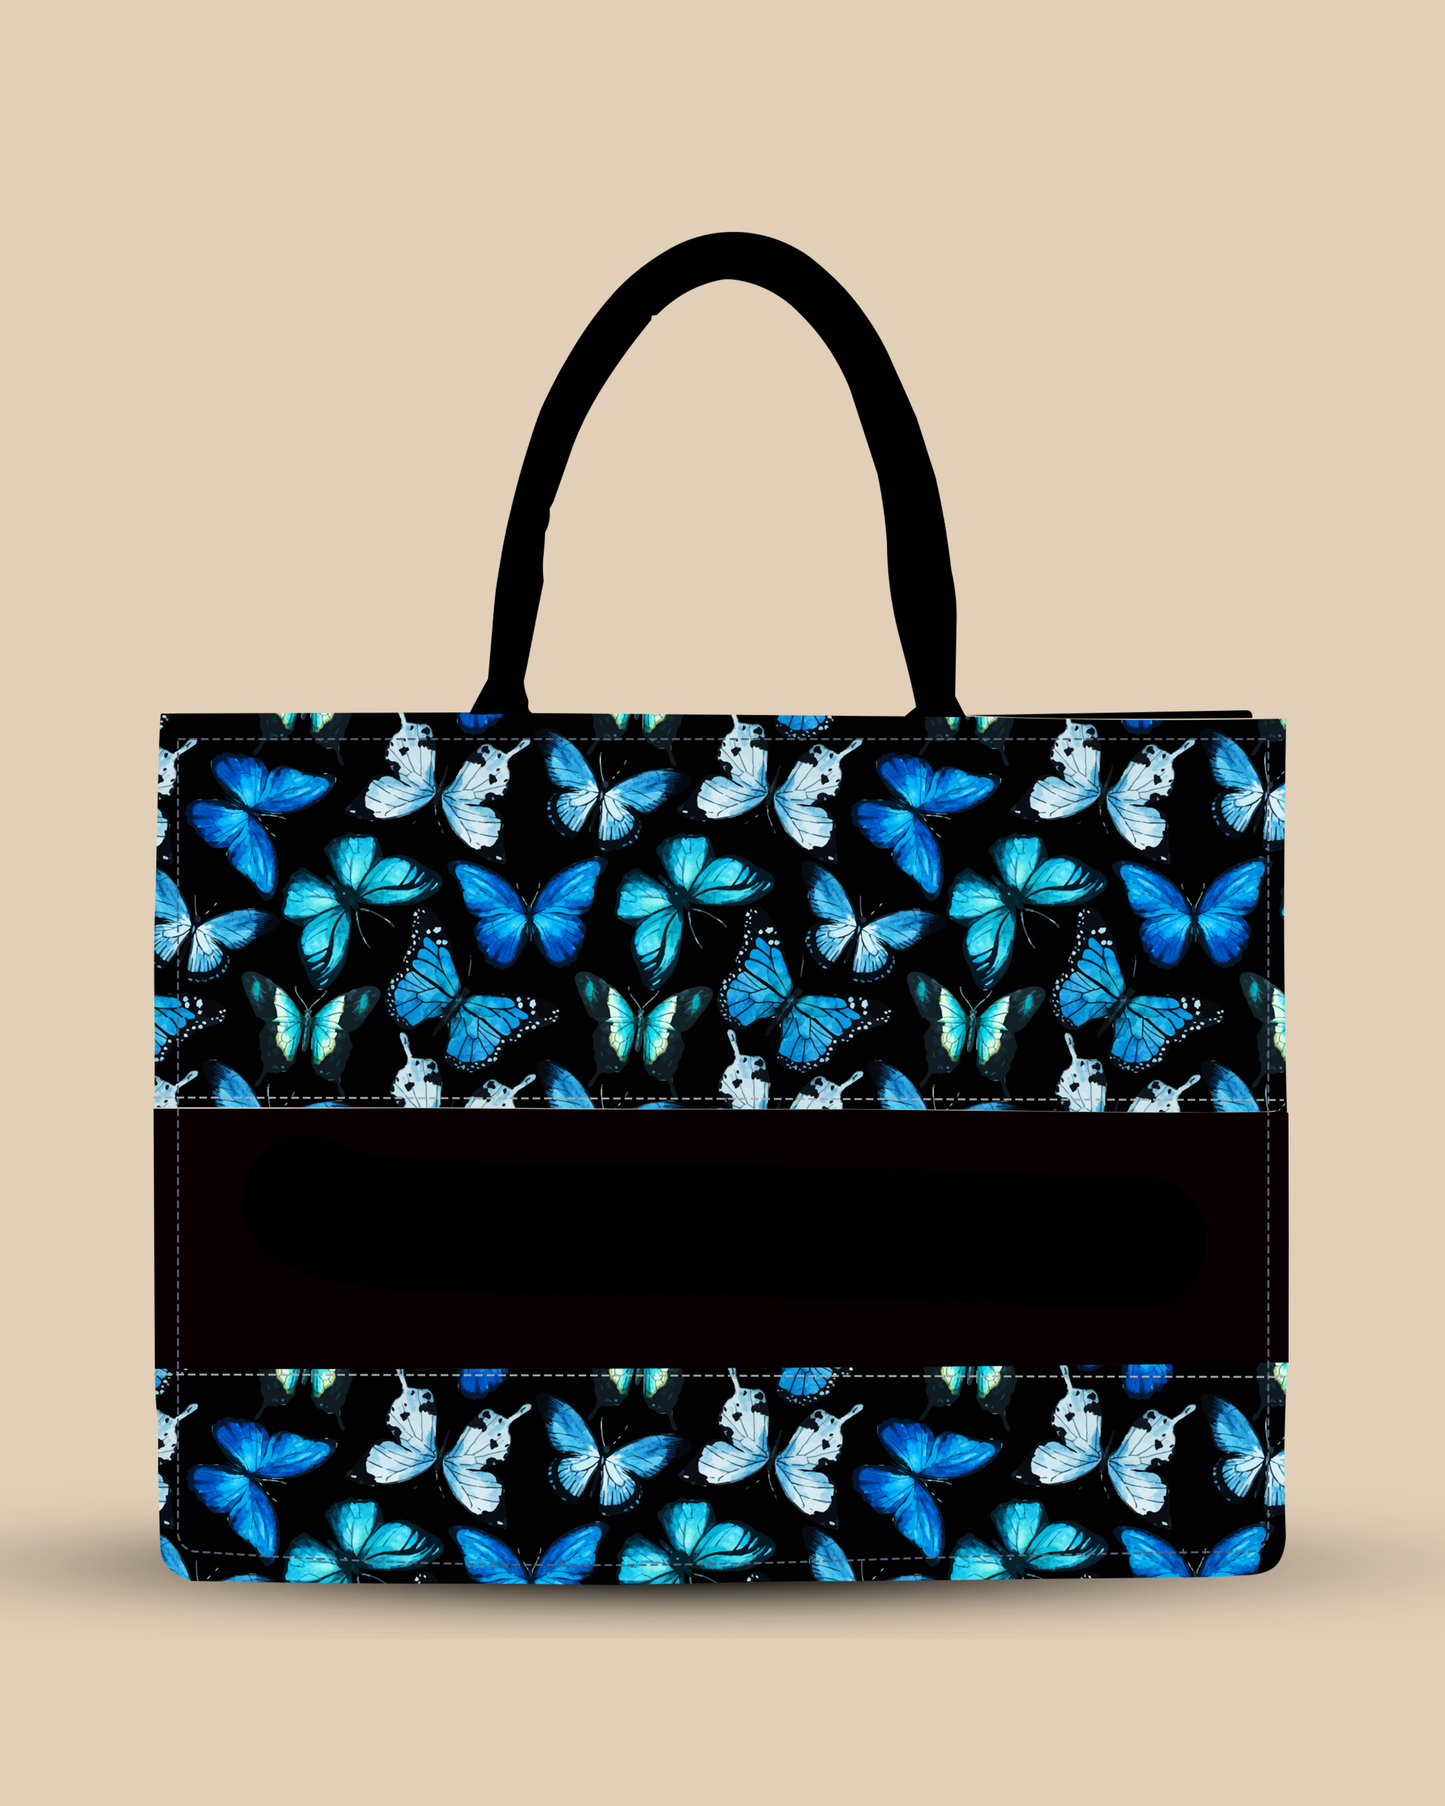 Customized Tote Bag Designed With Blue Flying Butterflies